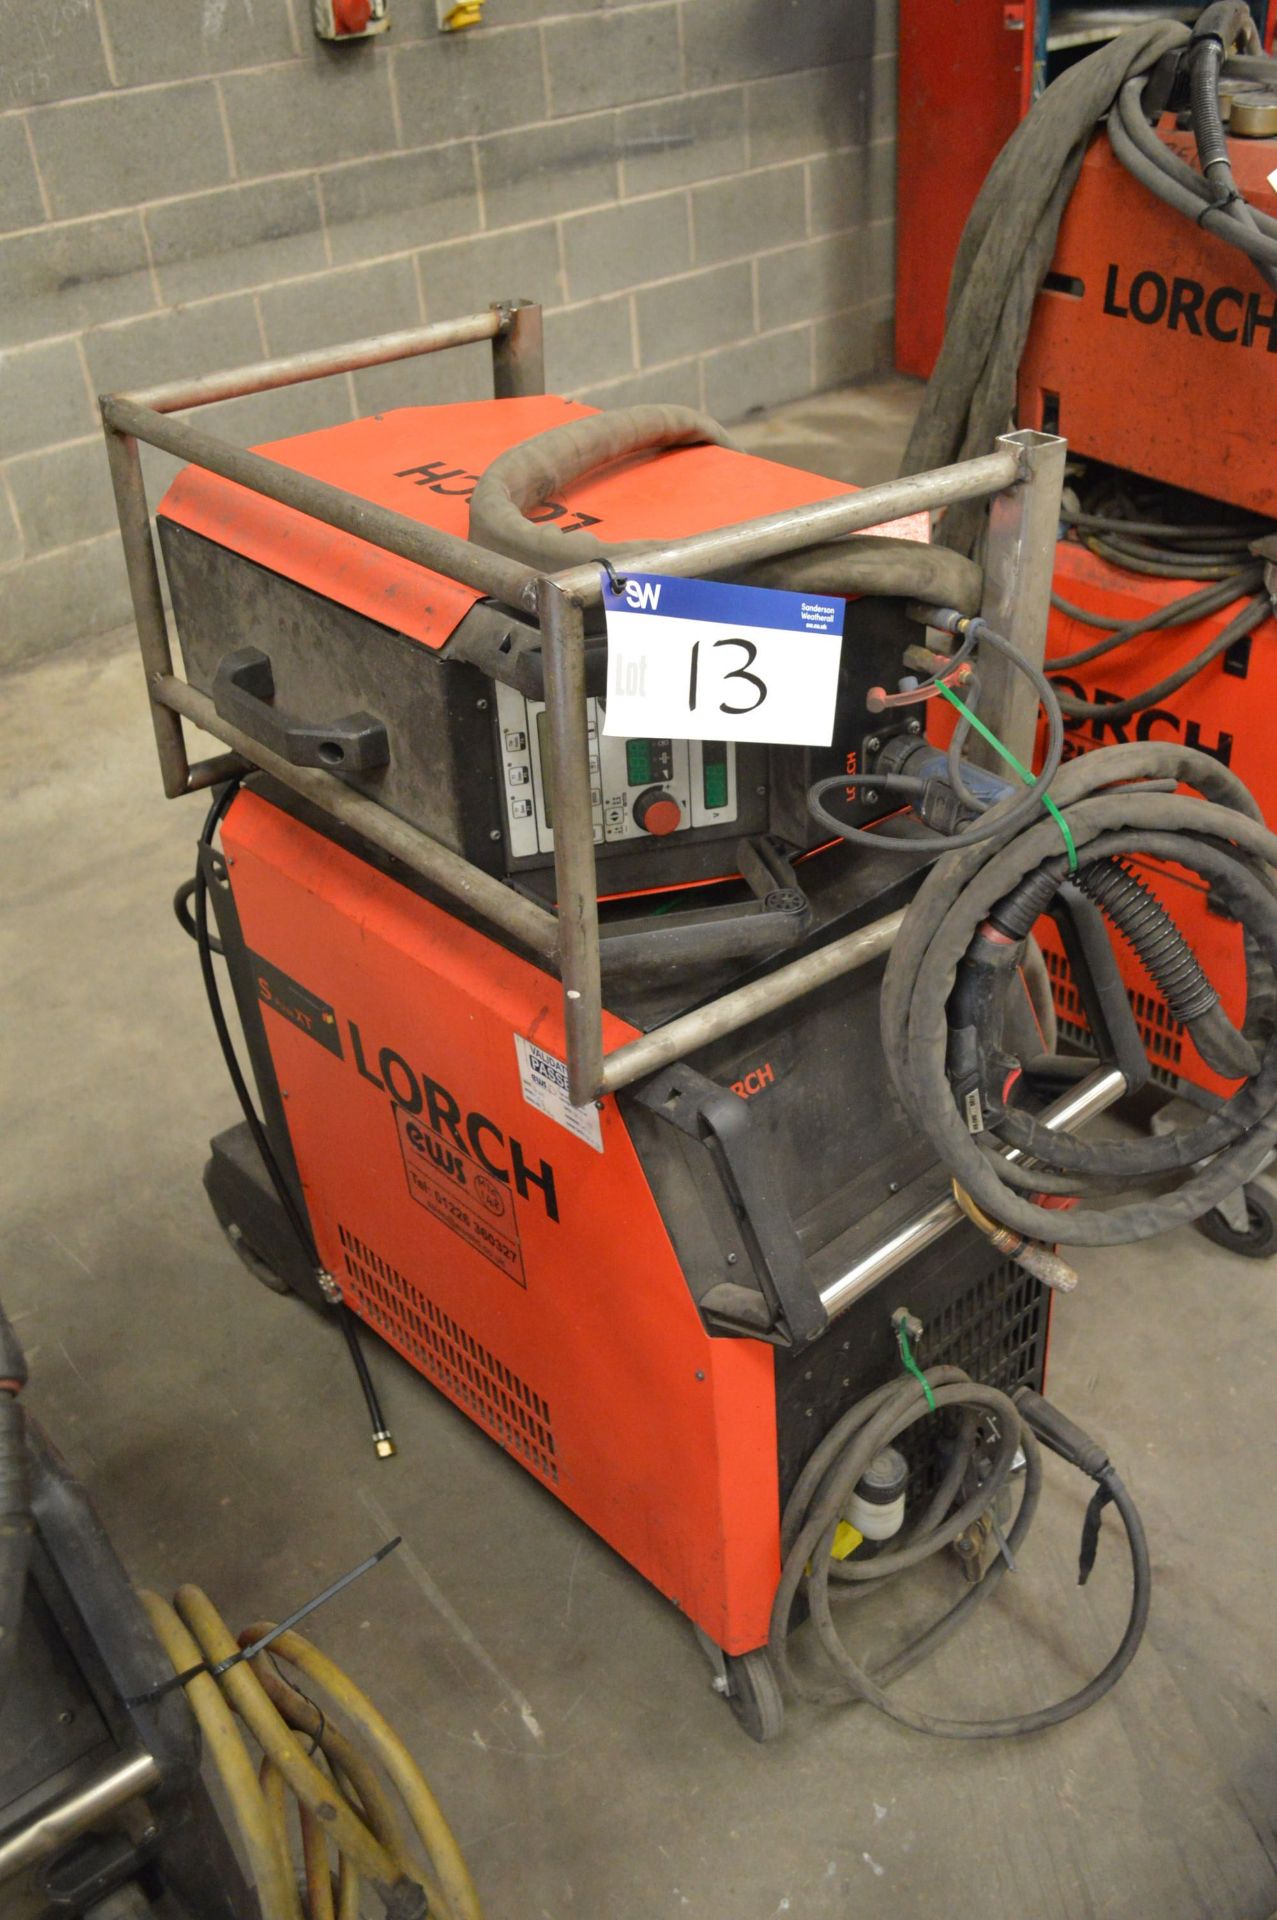 Lorch S5 Pulse XT Mig Welding Rectifier, serial no. 4085-2714-0002-1, with wire feed unit